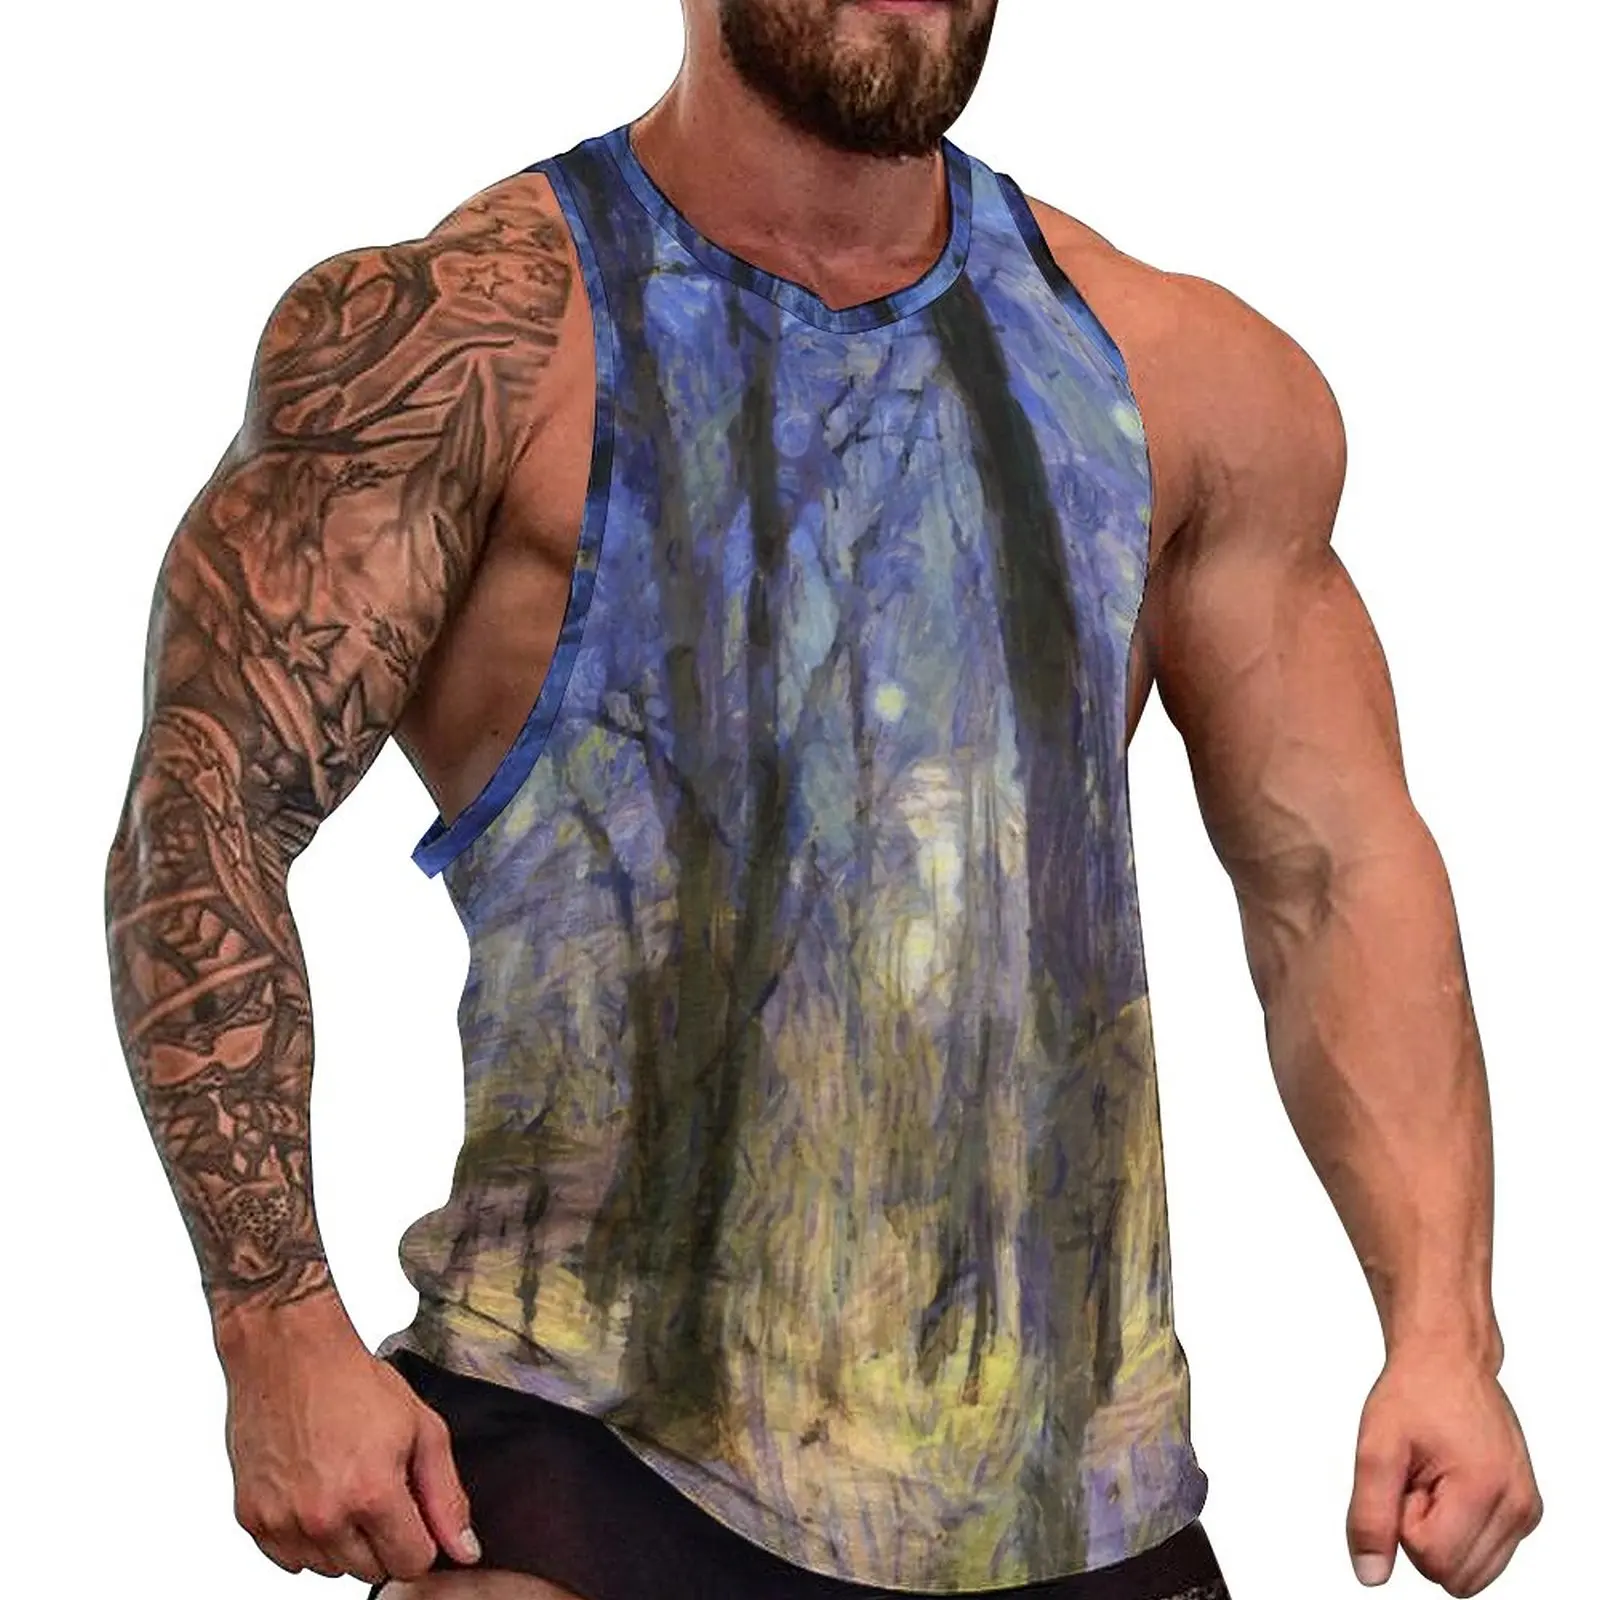 

Sunset Forest Print Summer Tank Top Van Gogh Workout Tops Mens Graphic Sportswear Sleeveless Vests Plus Size